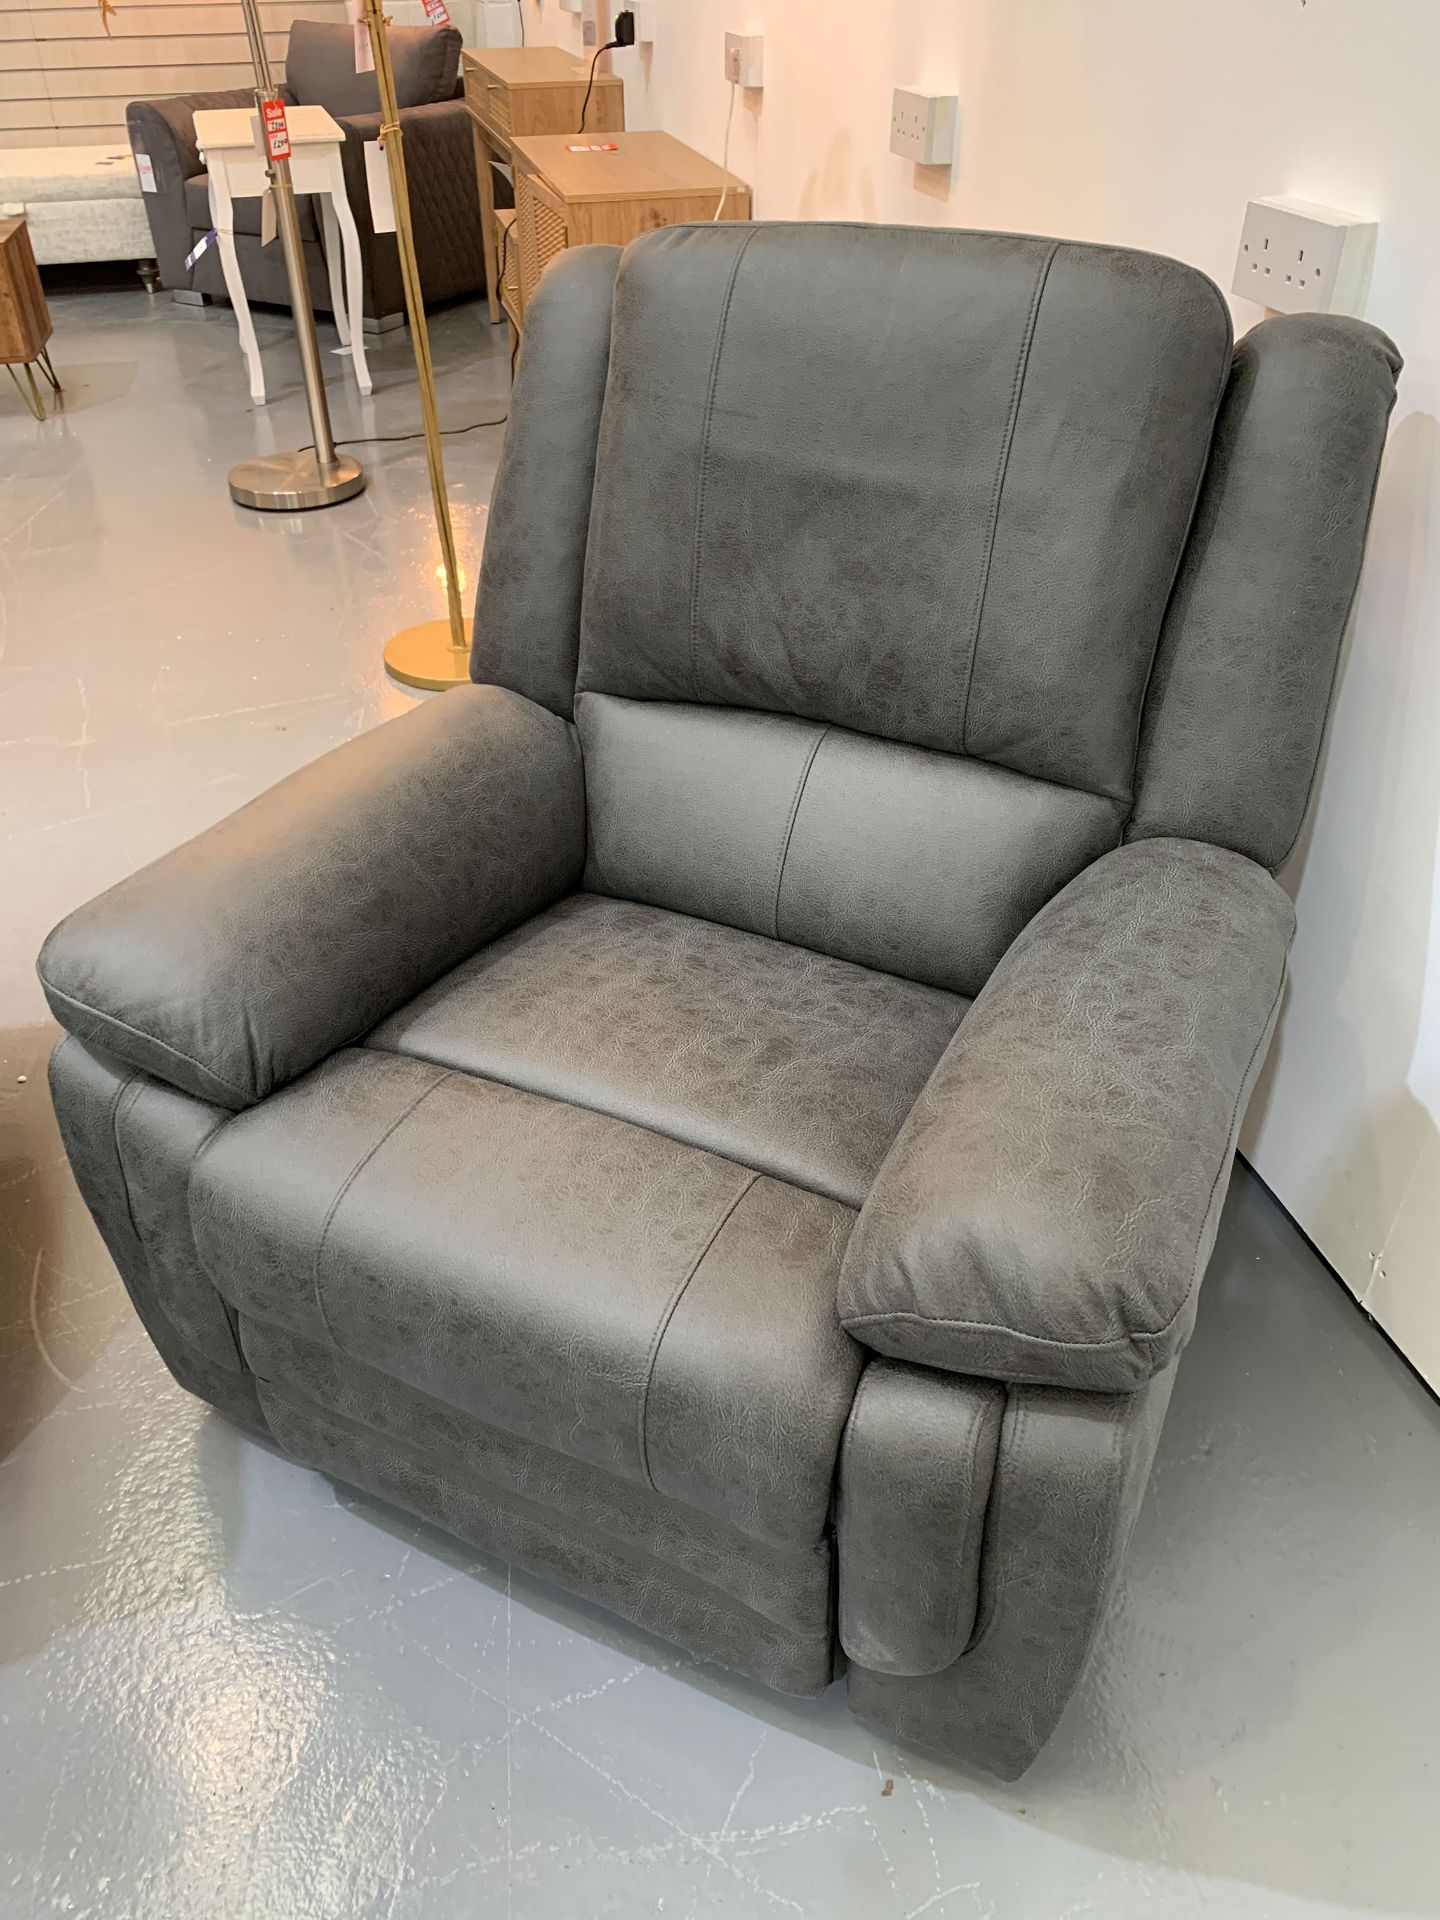 Two-Piece Suite Recliner Sofa and Recliner Armchair in Distressed Leather Effect Upholstery - Image 5 of 7